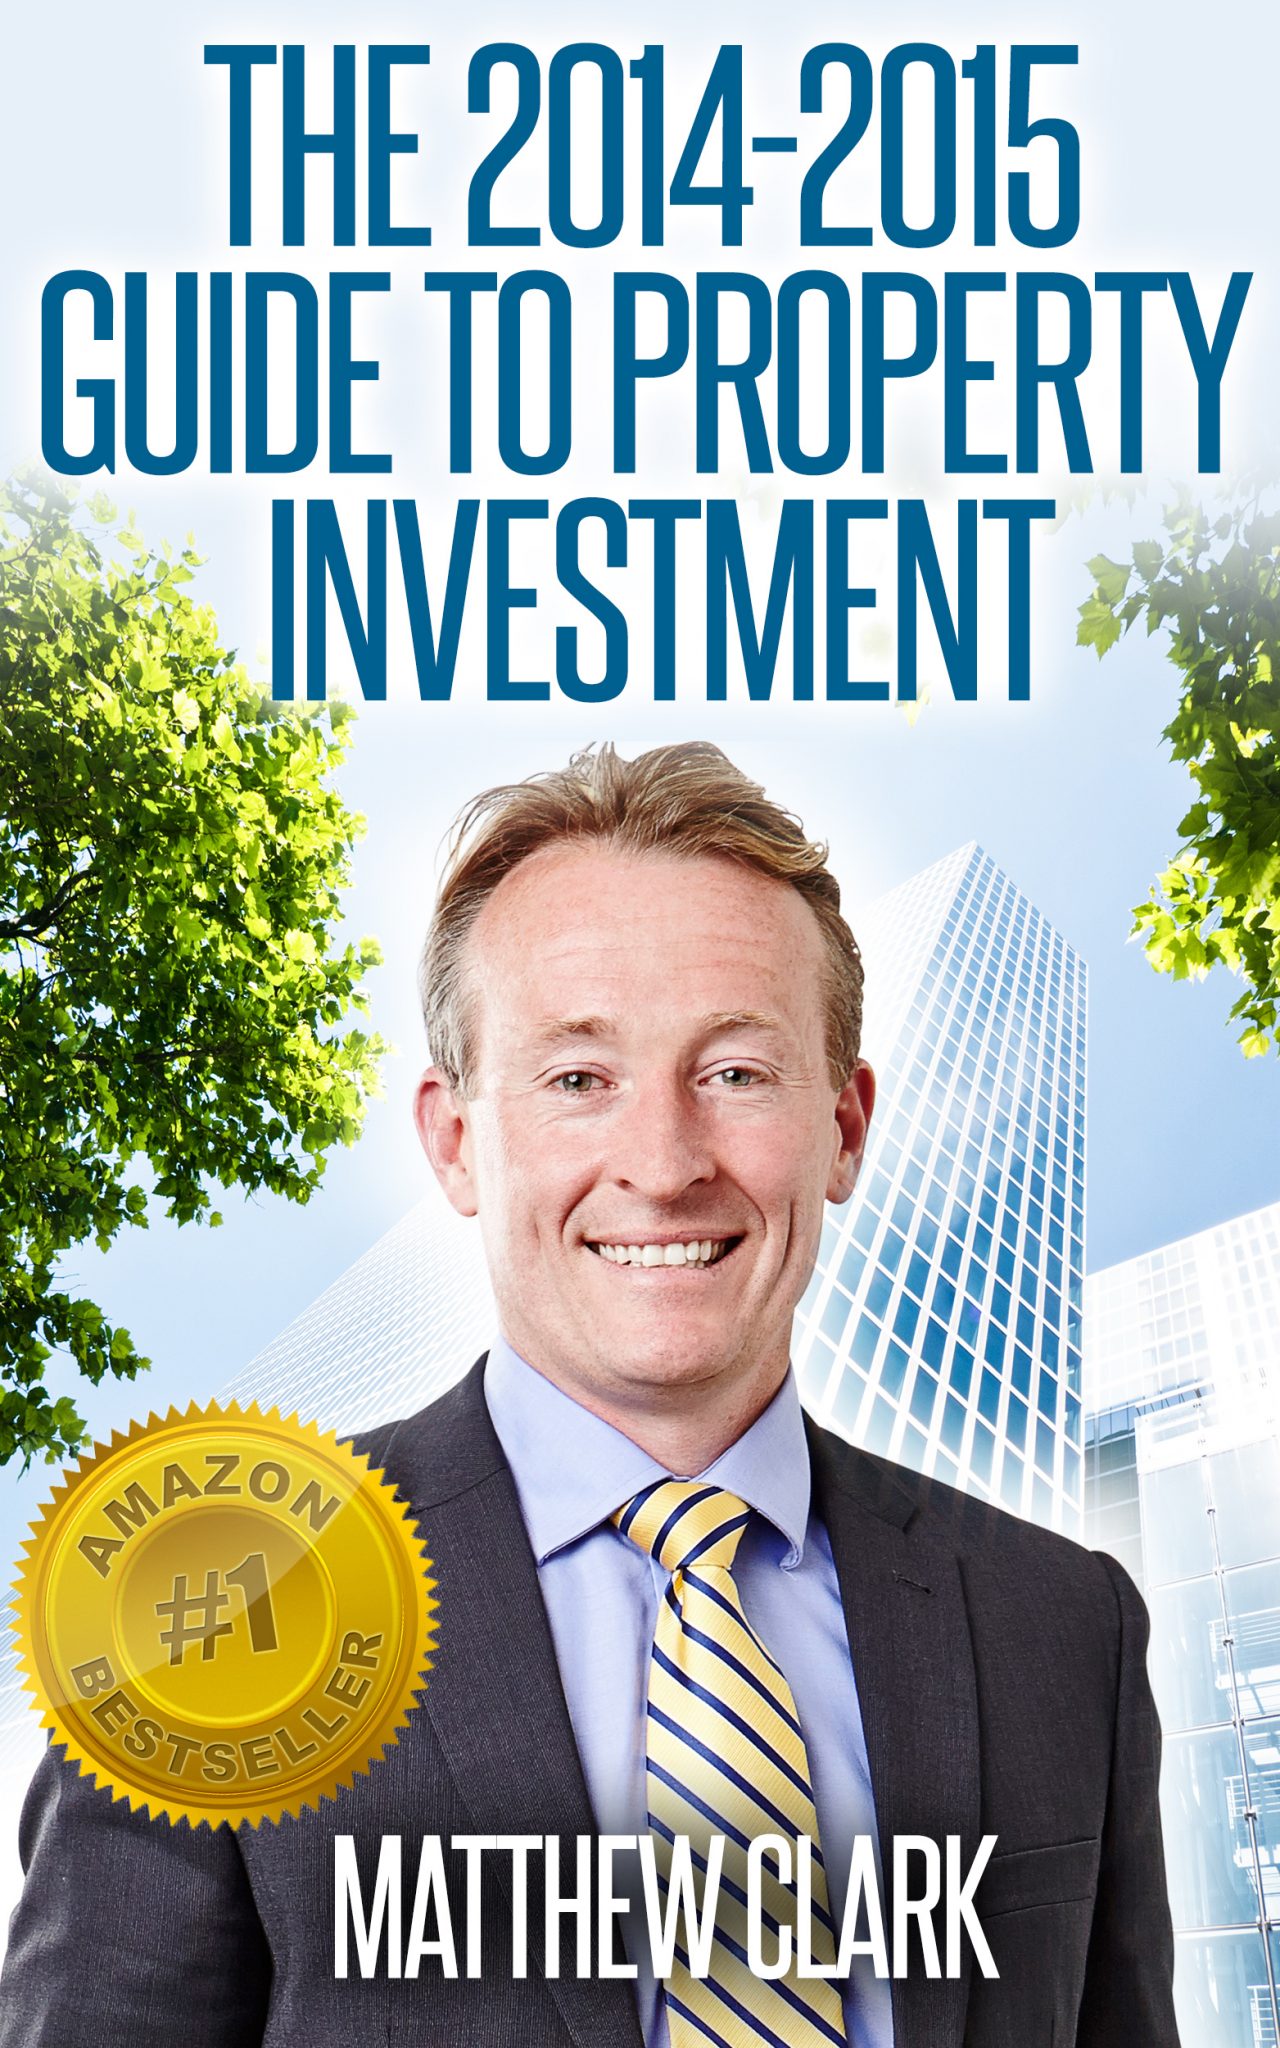 The 2014-2015 Guide to Property Investment